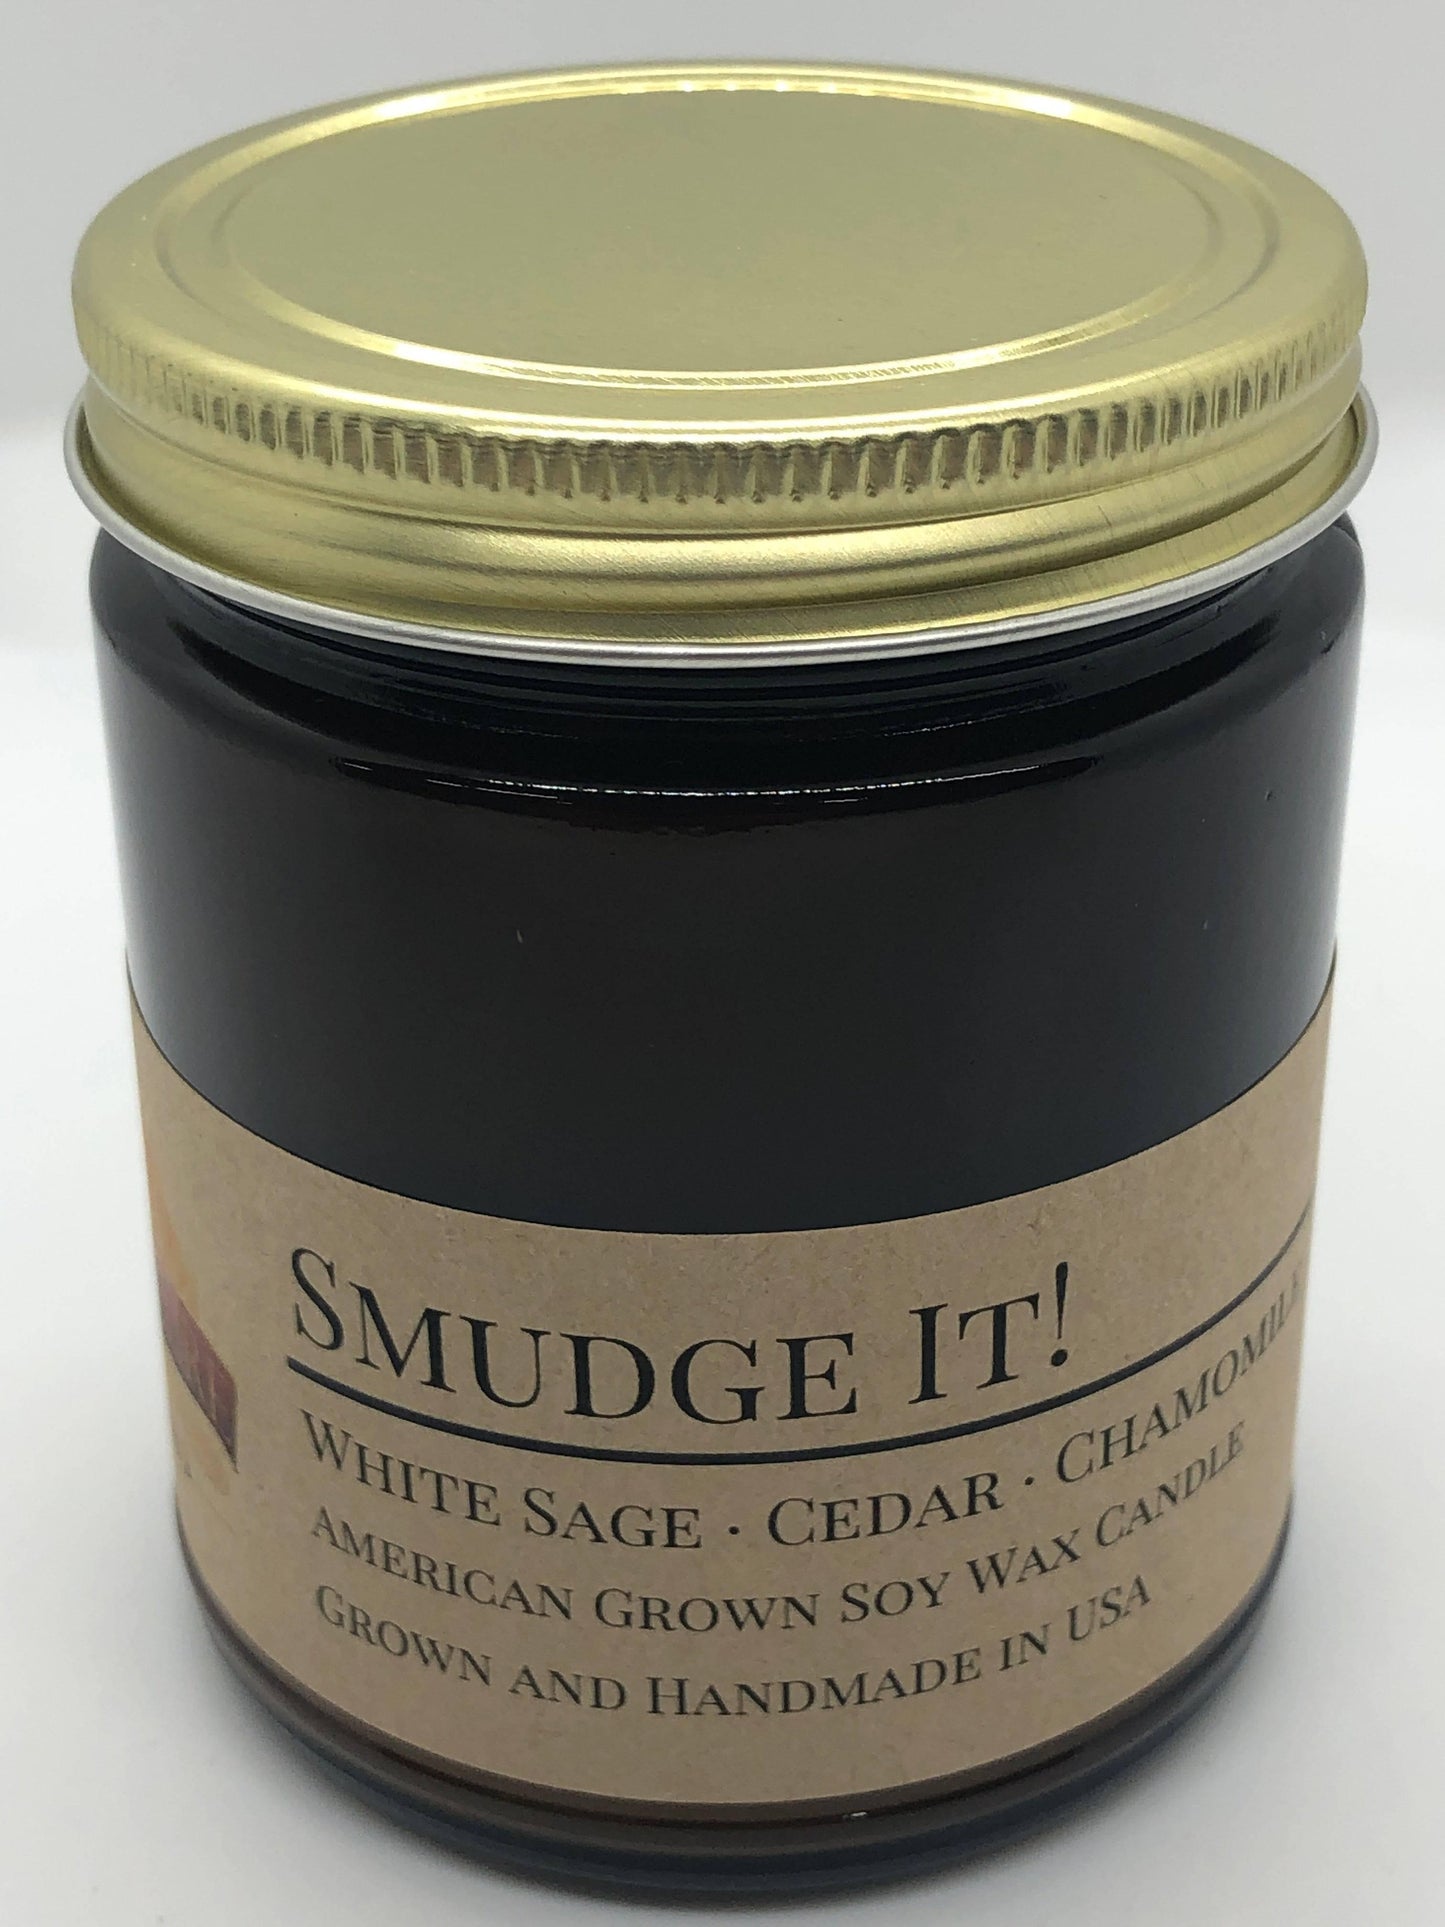 Smudge It! Soy Wax Candle | 9 oz Amber Apothecary Jar - Prairie Fire Candles